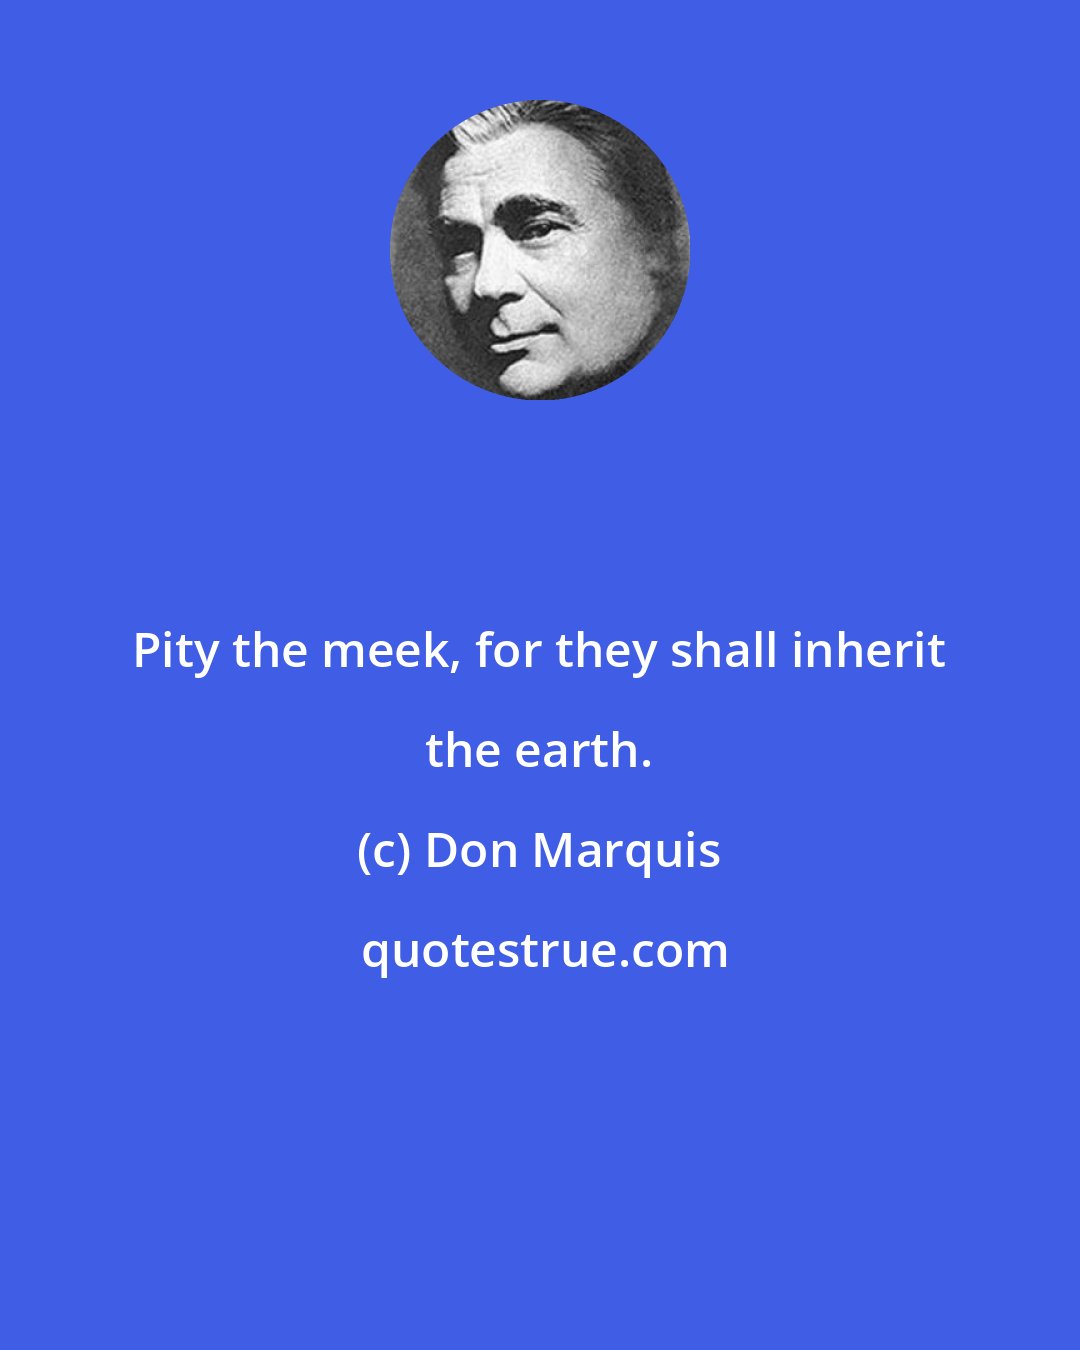 Don Marquis: Pity the meek, for they shall inherit the earth.